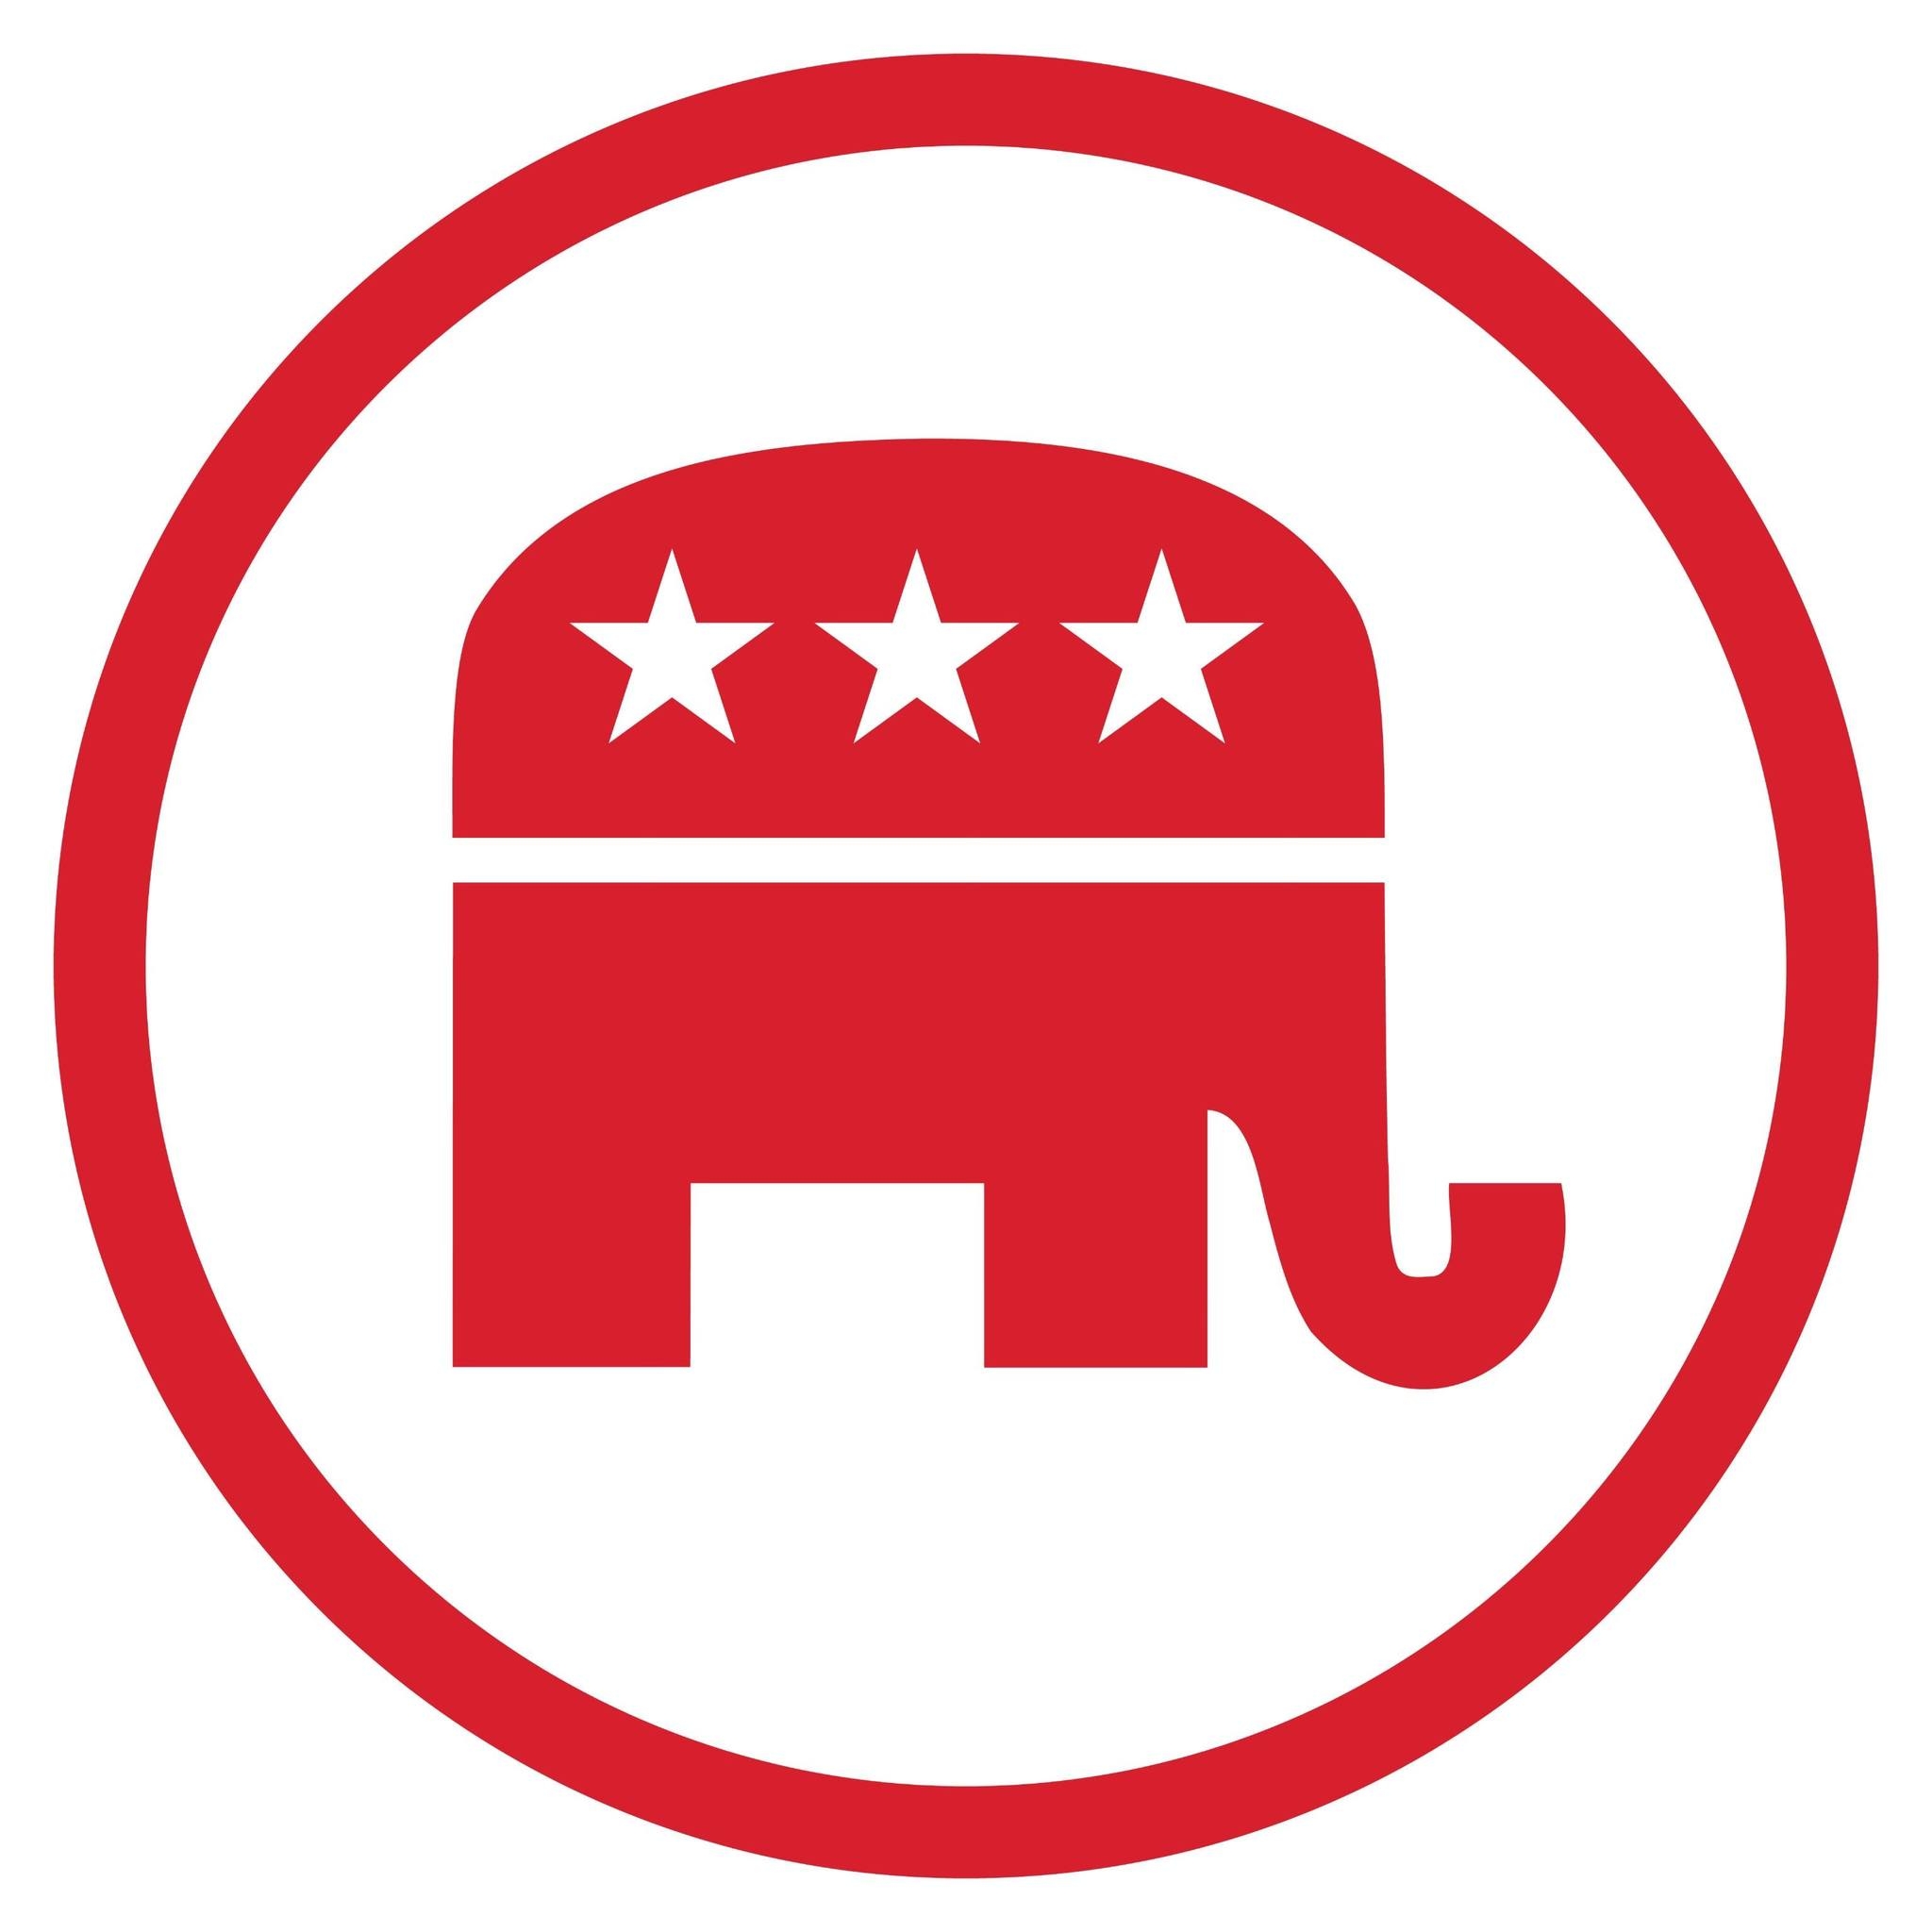 National Republican Committee